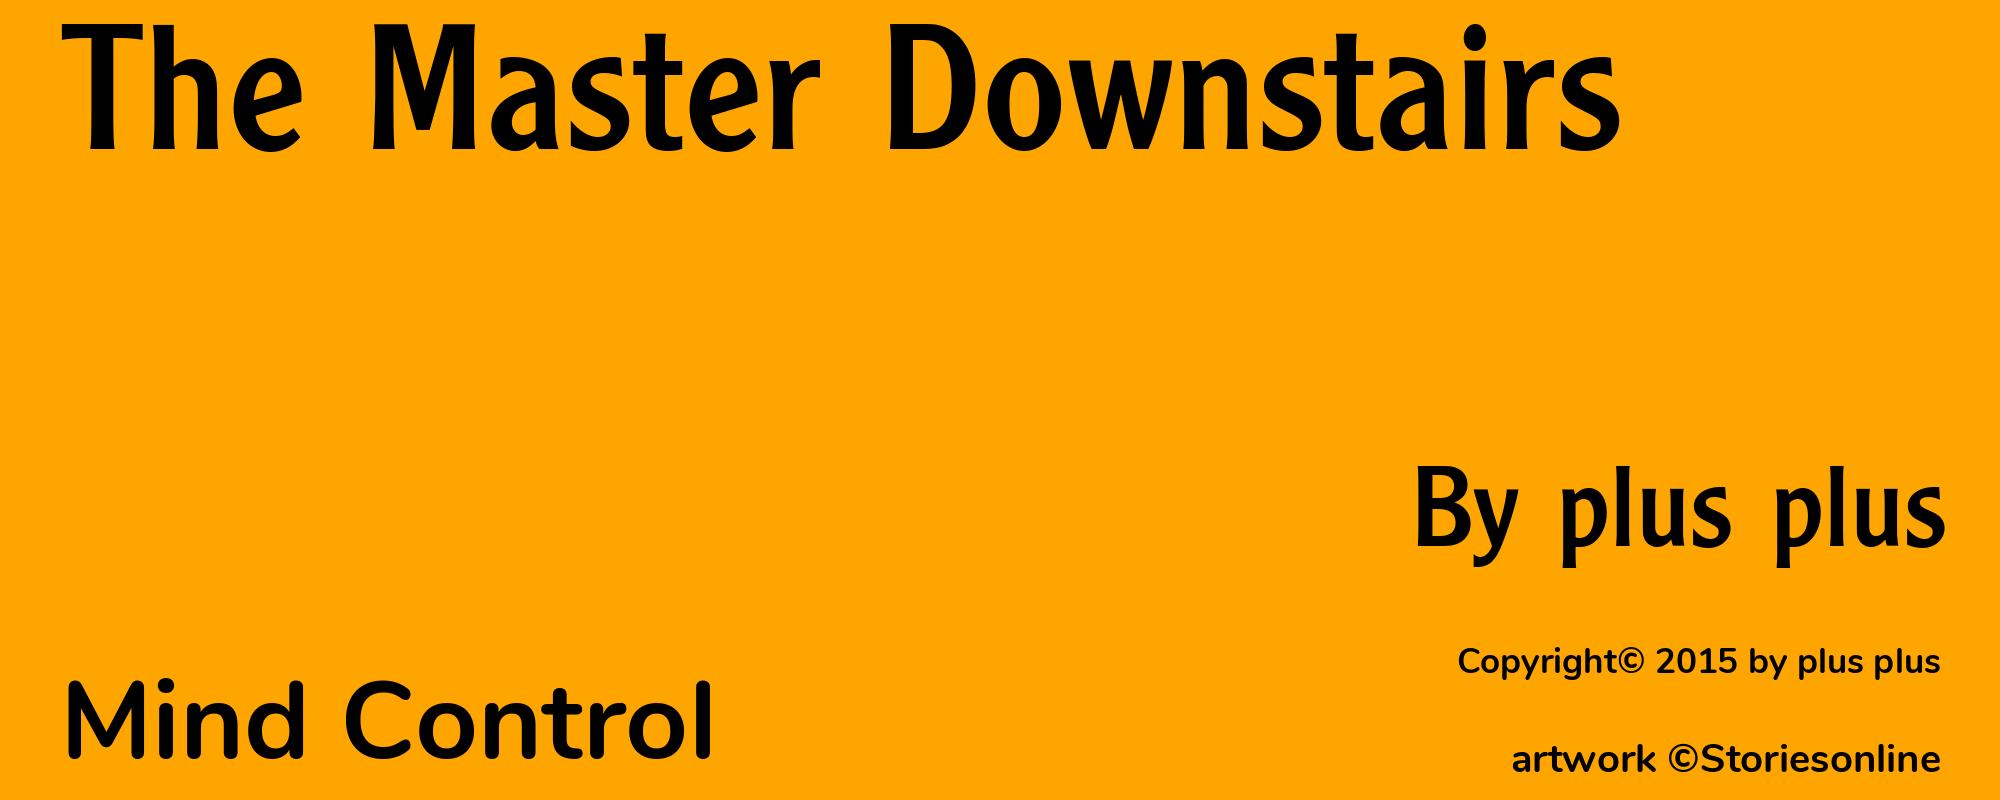 The Master Downstairs - Cover